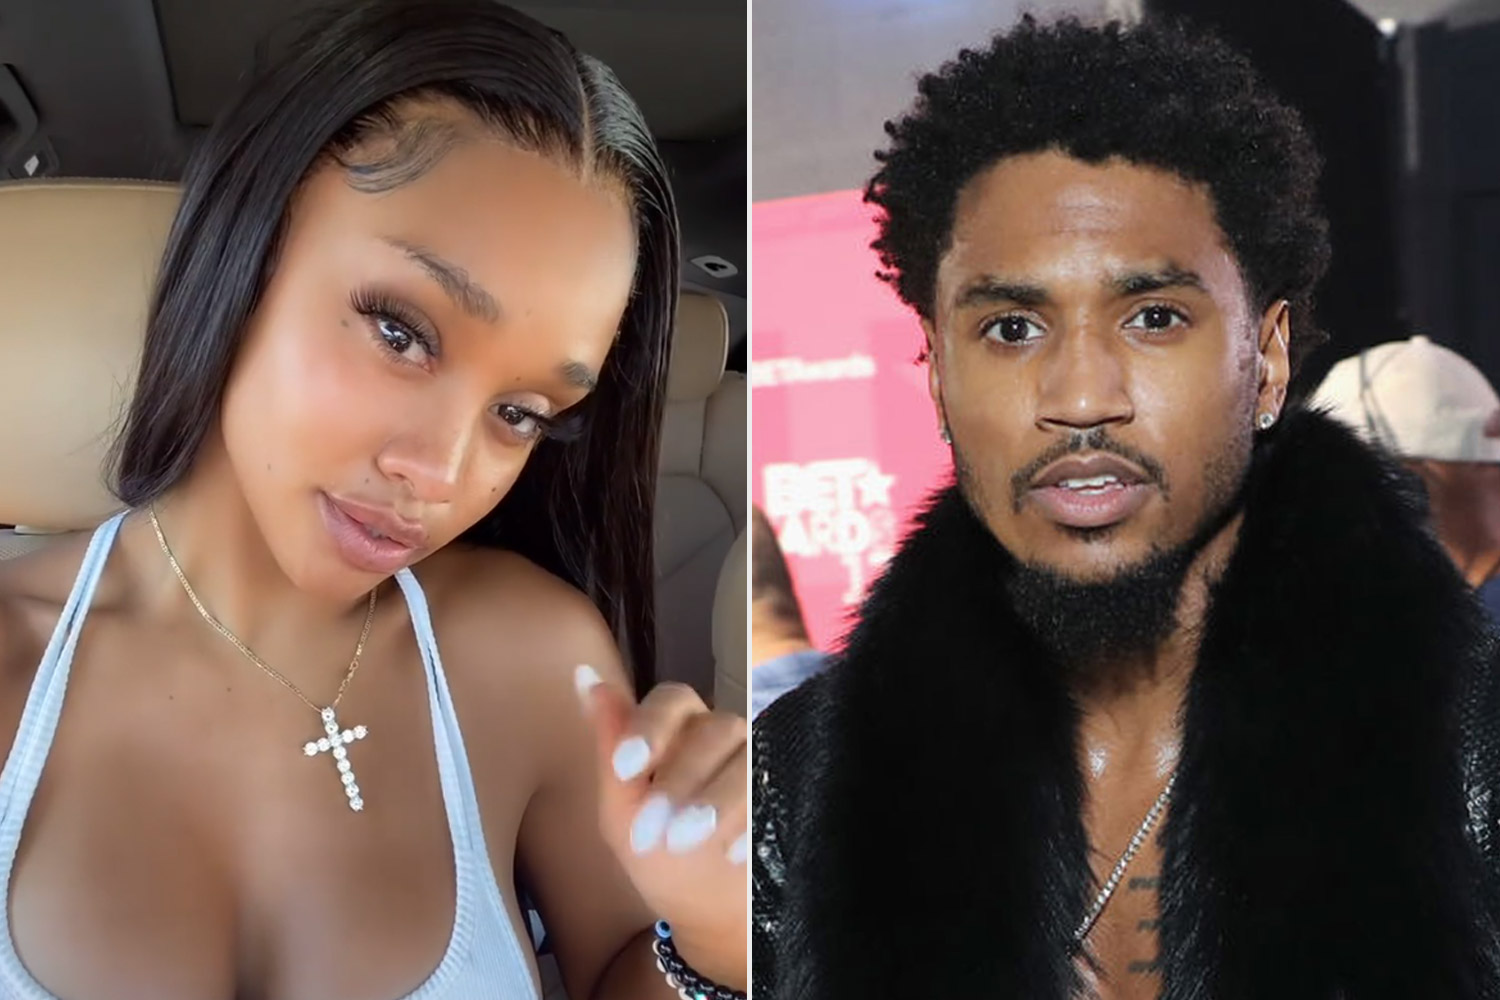 Former Basketball Player Pursues Legal Options Against Trey Songz Over Rape Allegations